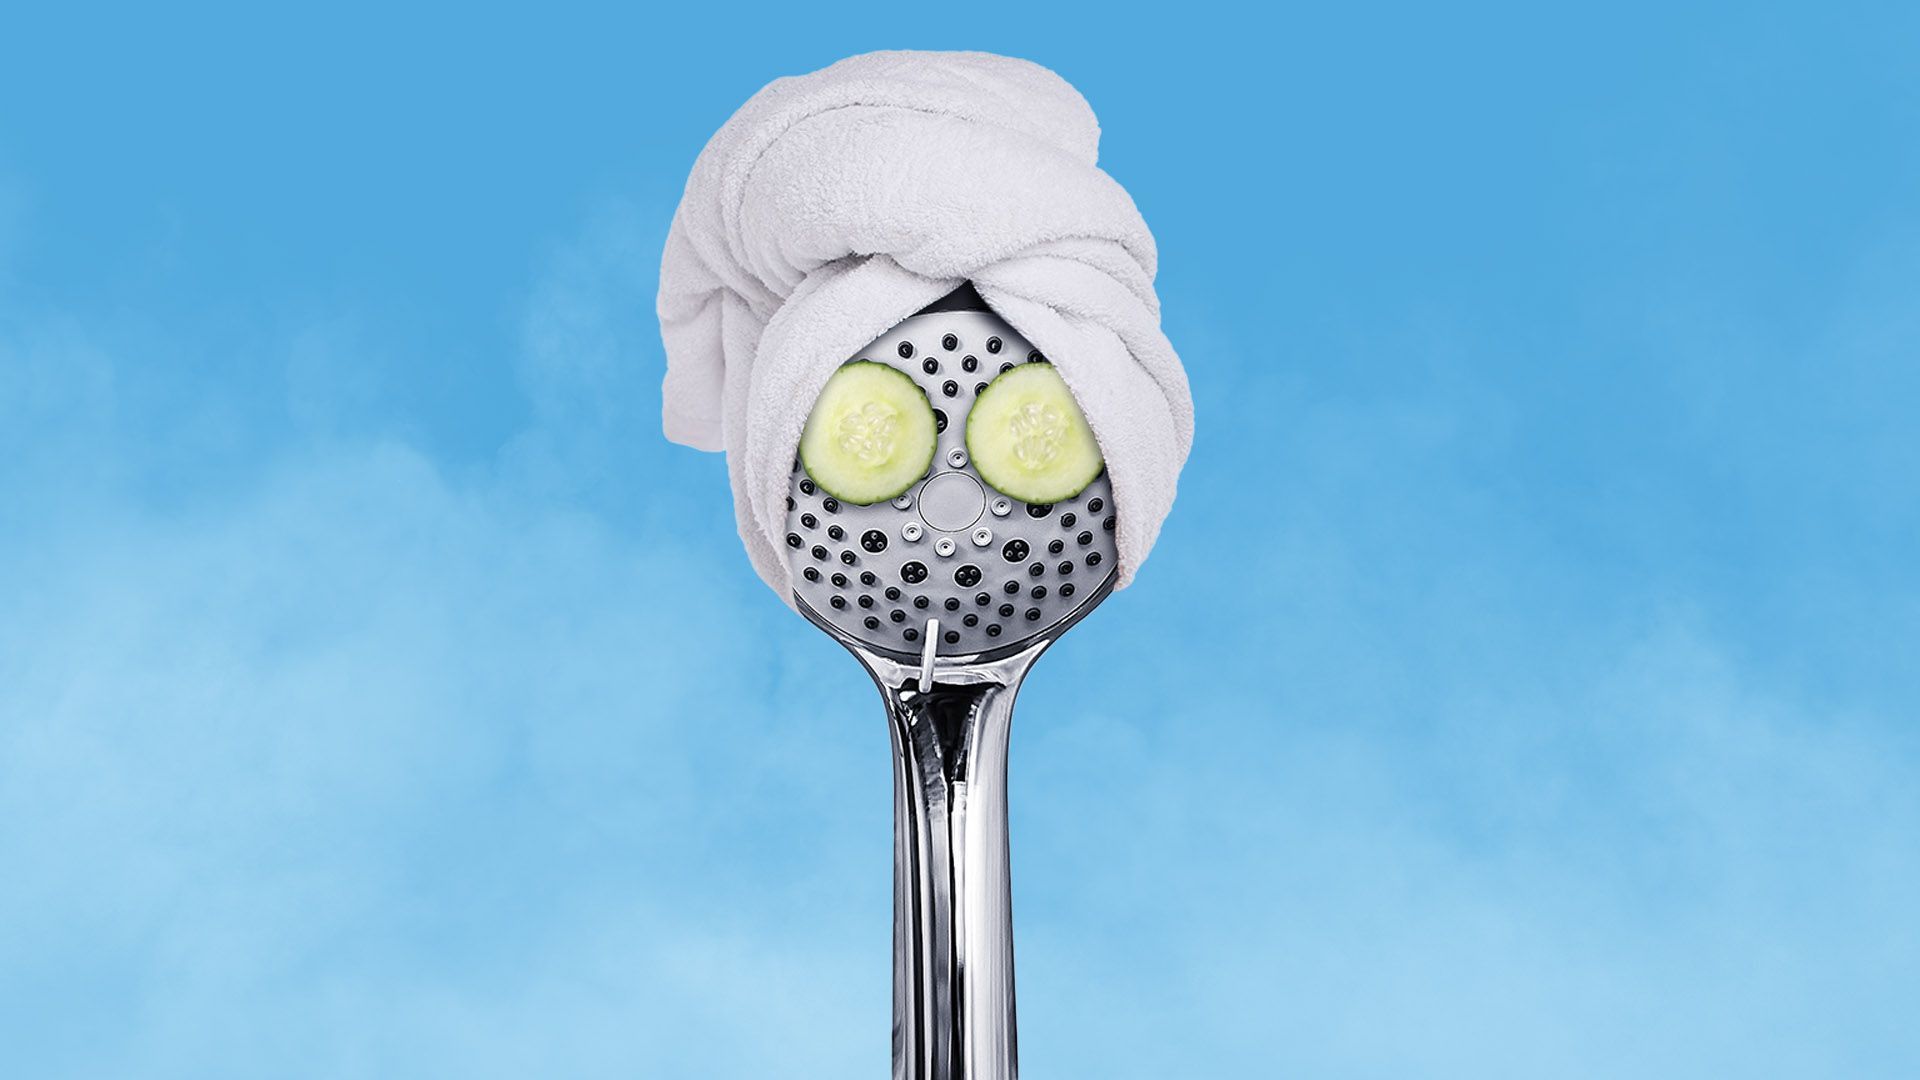 An illustration showing a shower head made to look like a person with cucumbers over the "eyes" and a towel wrapped around the "head"